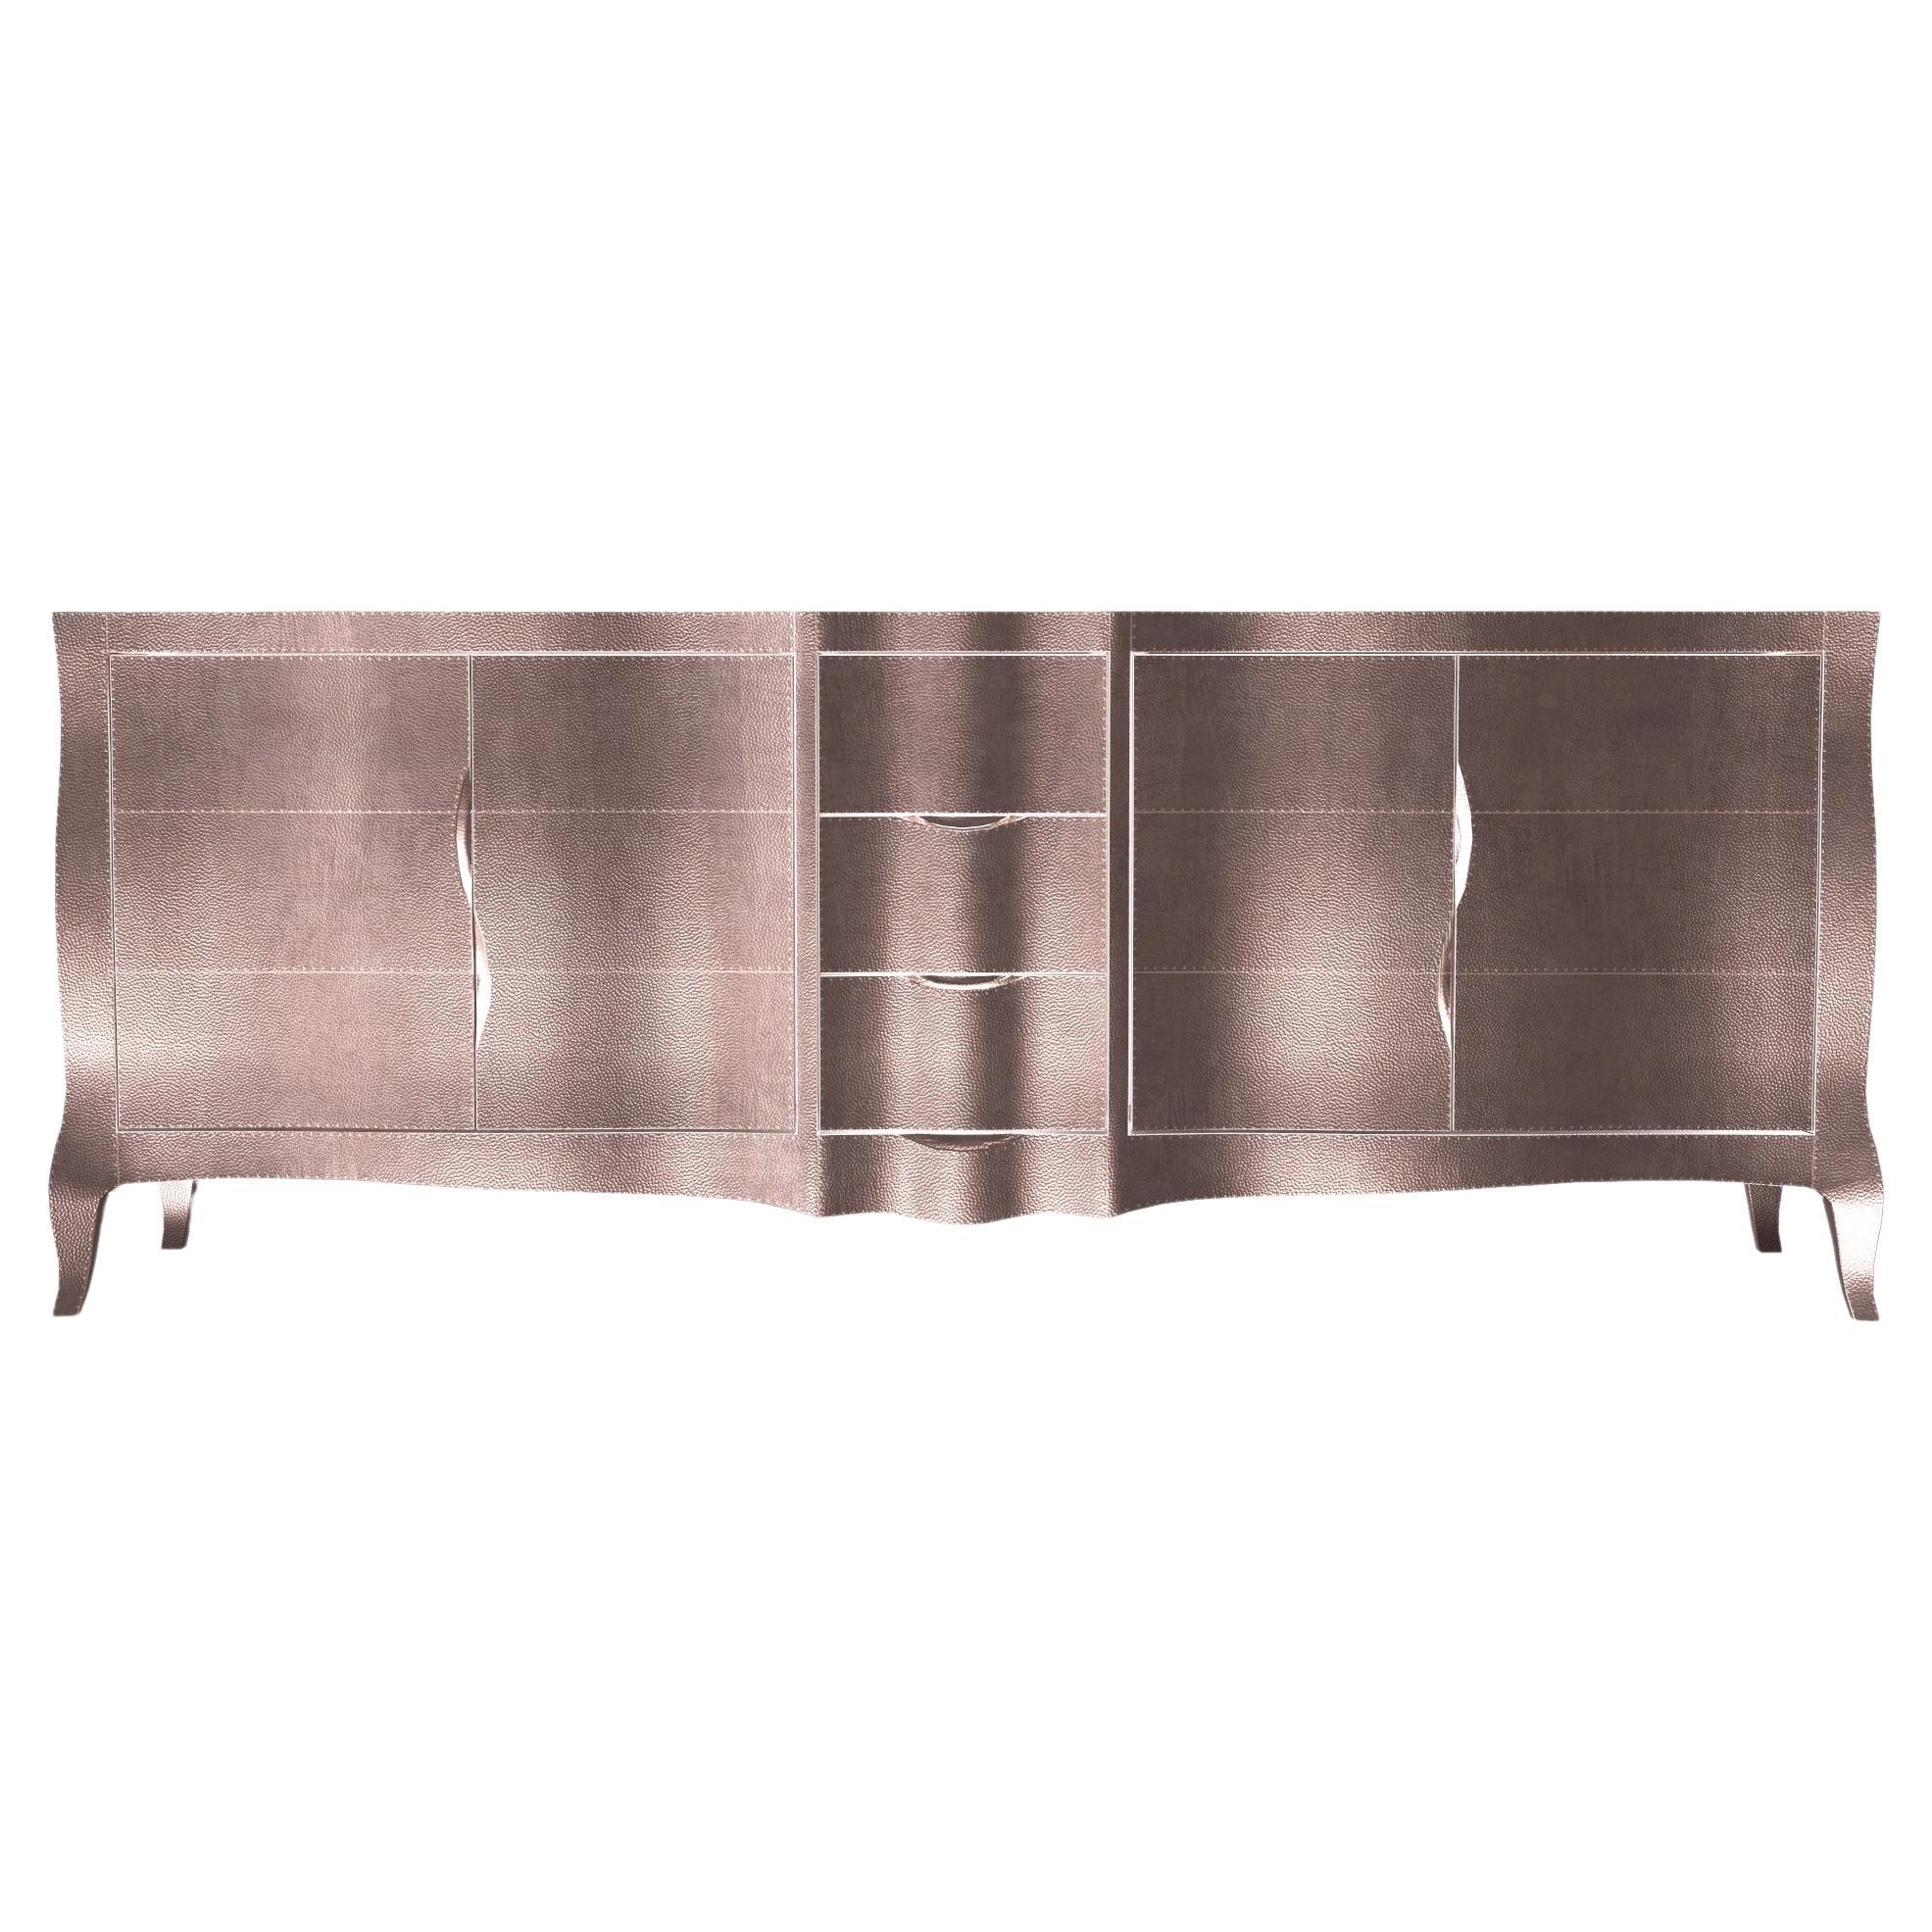 Louise Credenza Art Deco Sideboards in Mid. Hammered Copper by Paul Mathieu